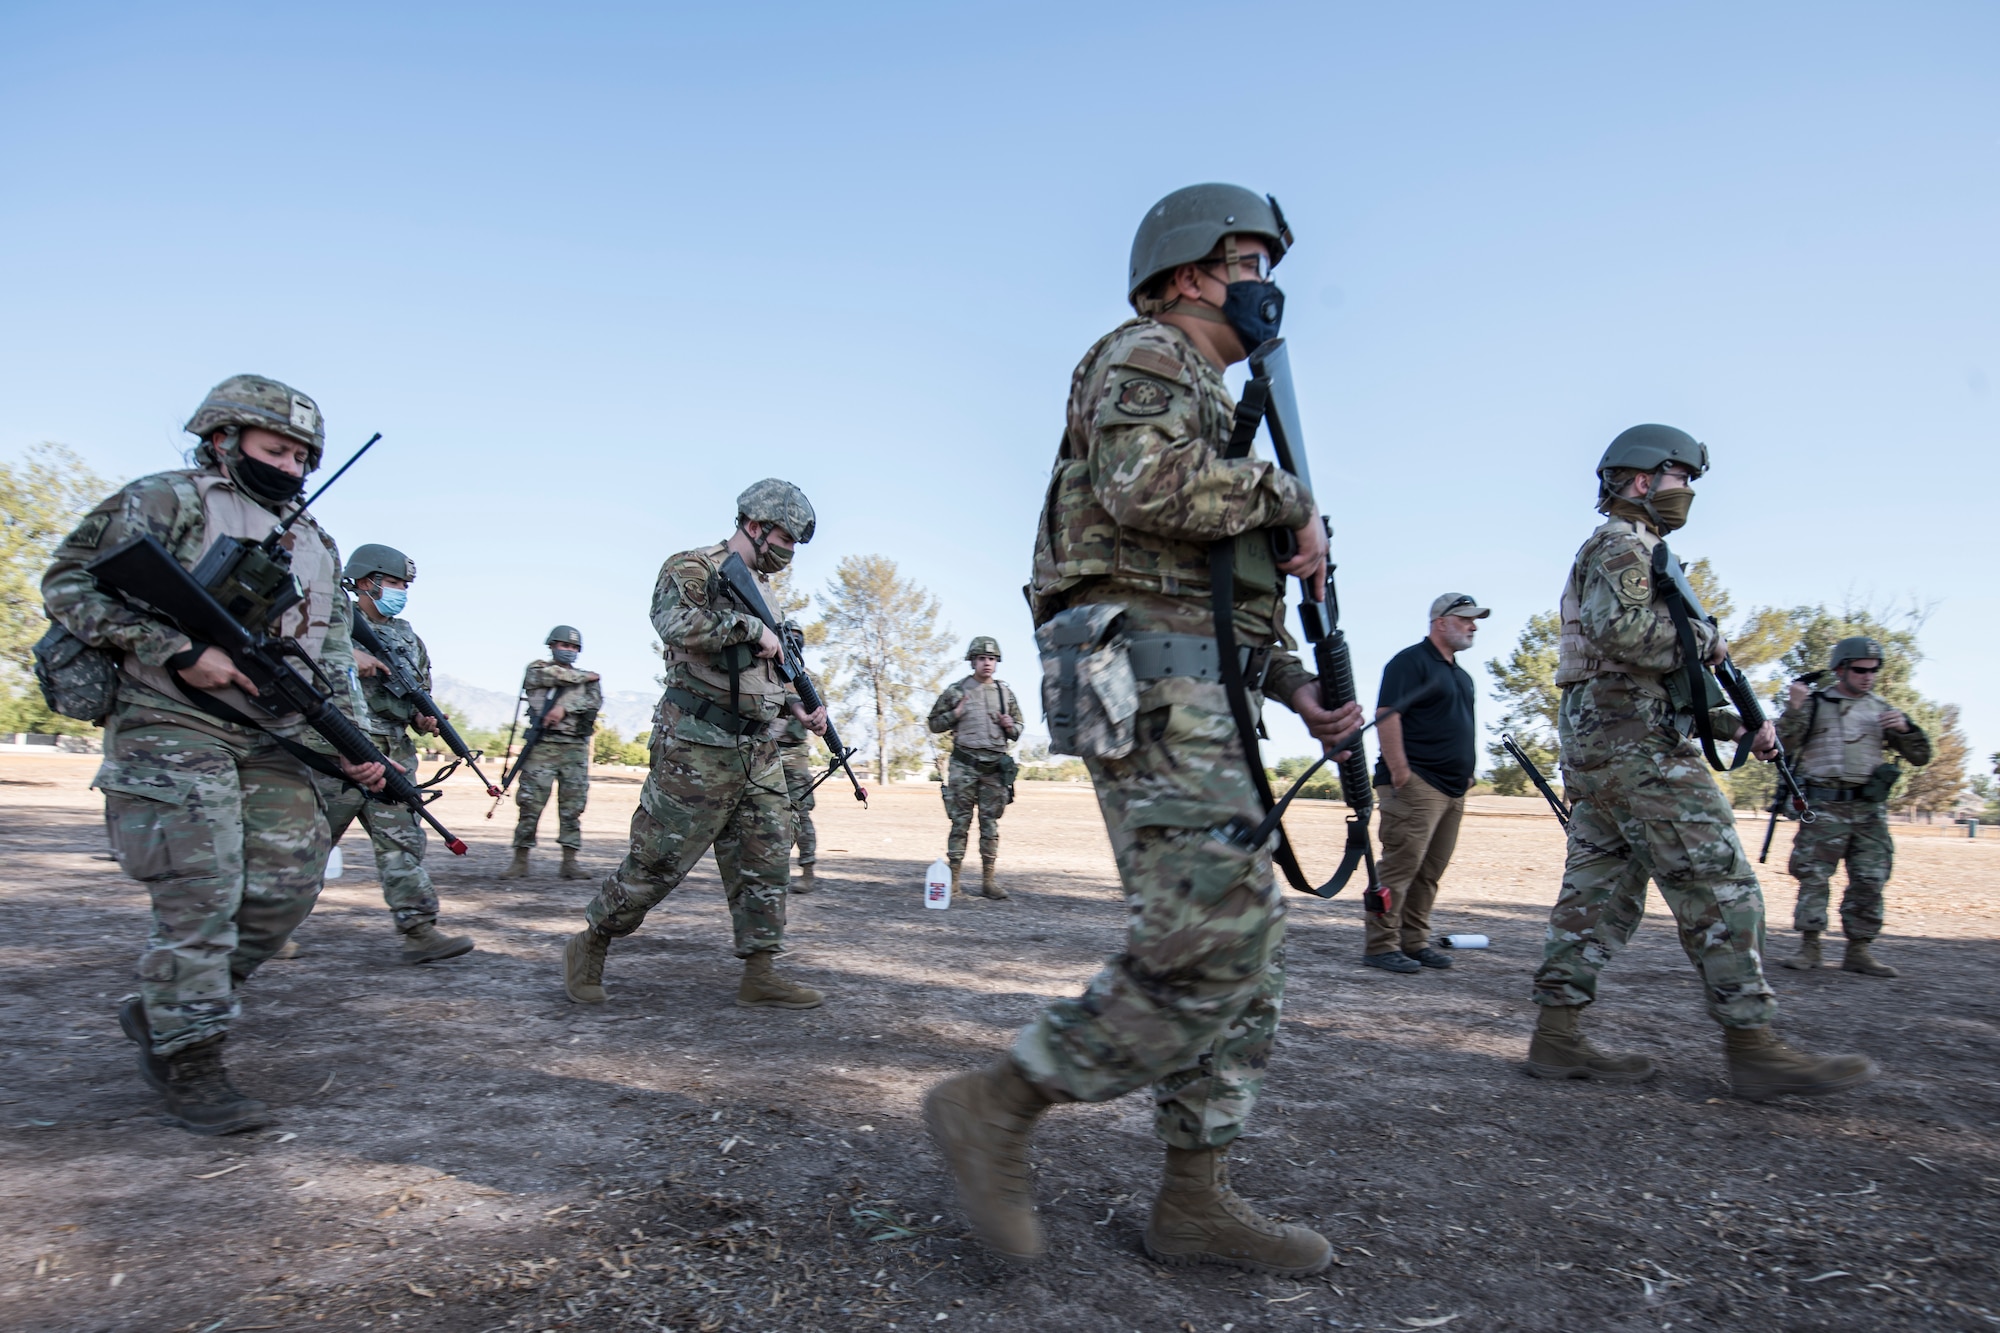 A photo of Airmen conducting security forces training